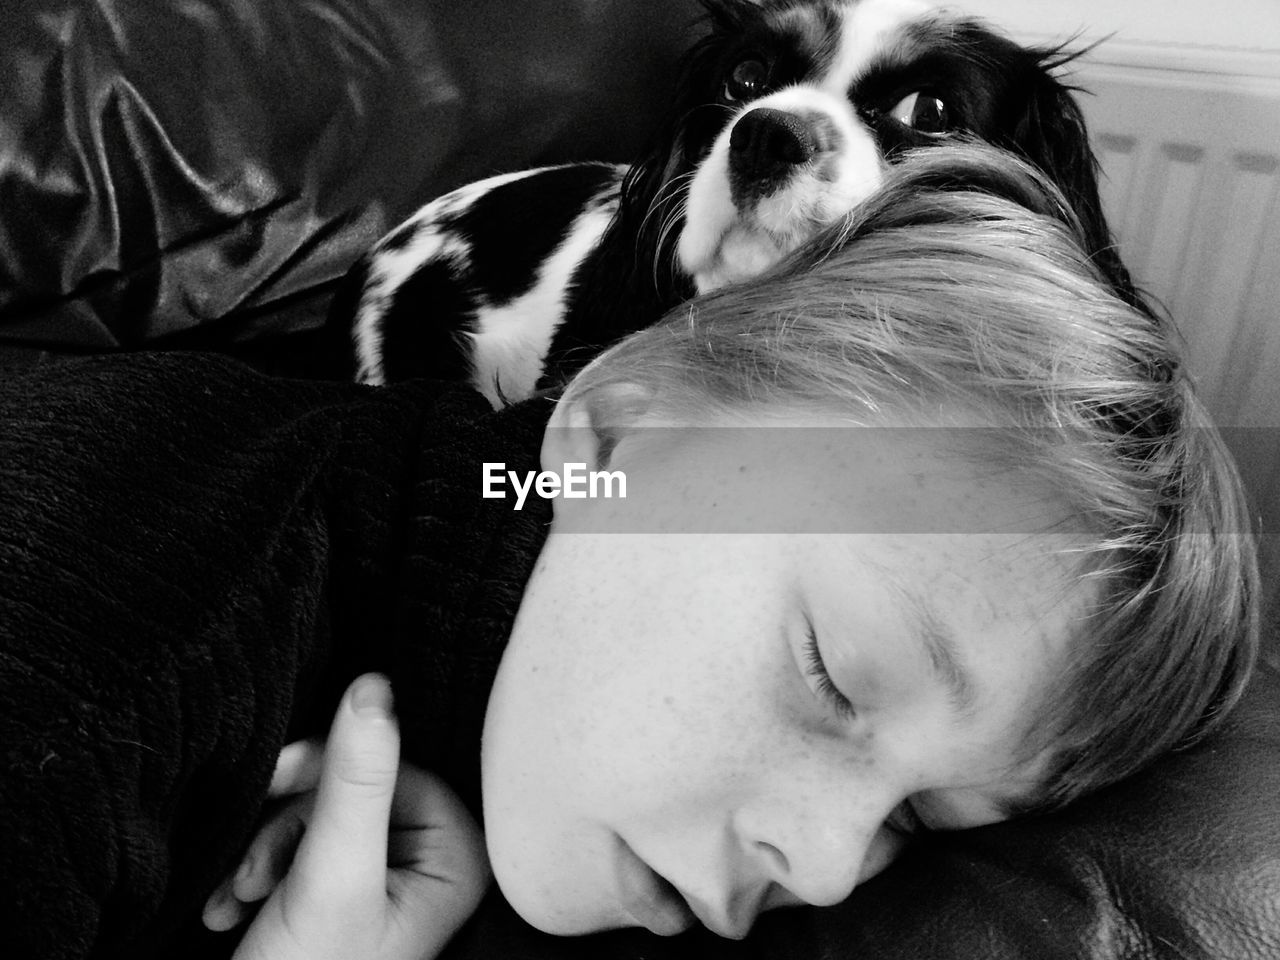 Close-up of sleeping boy and a dog